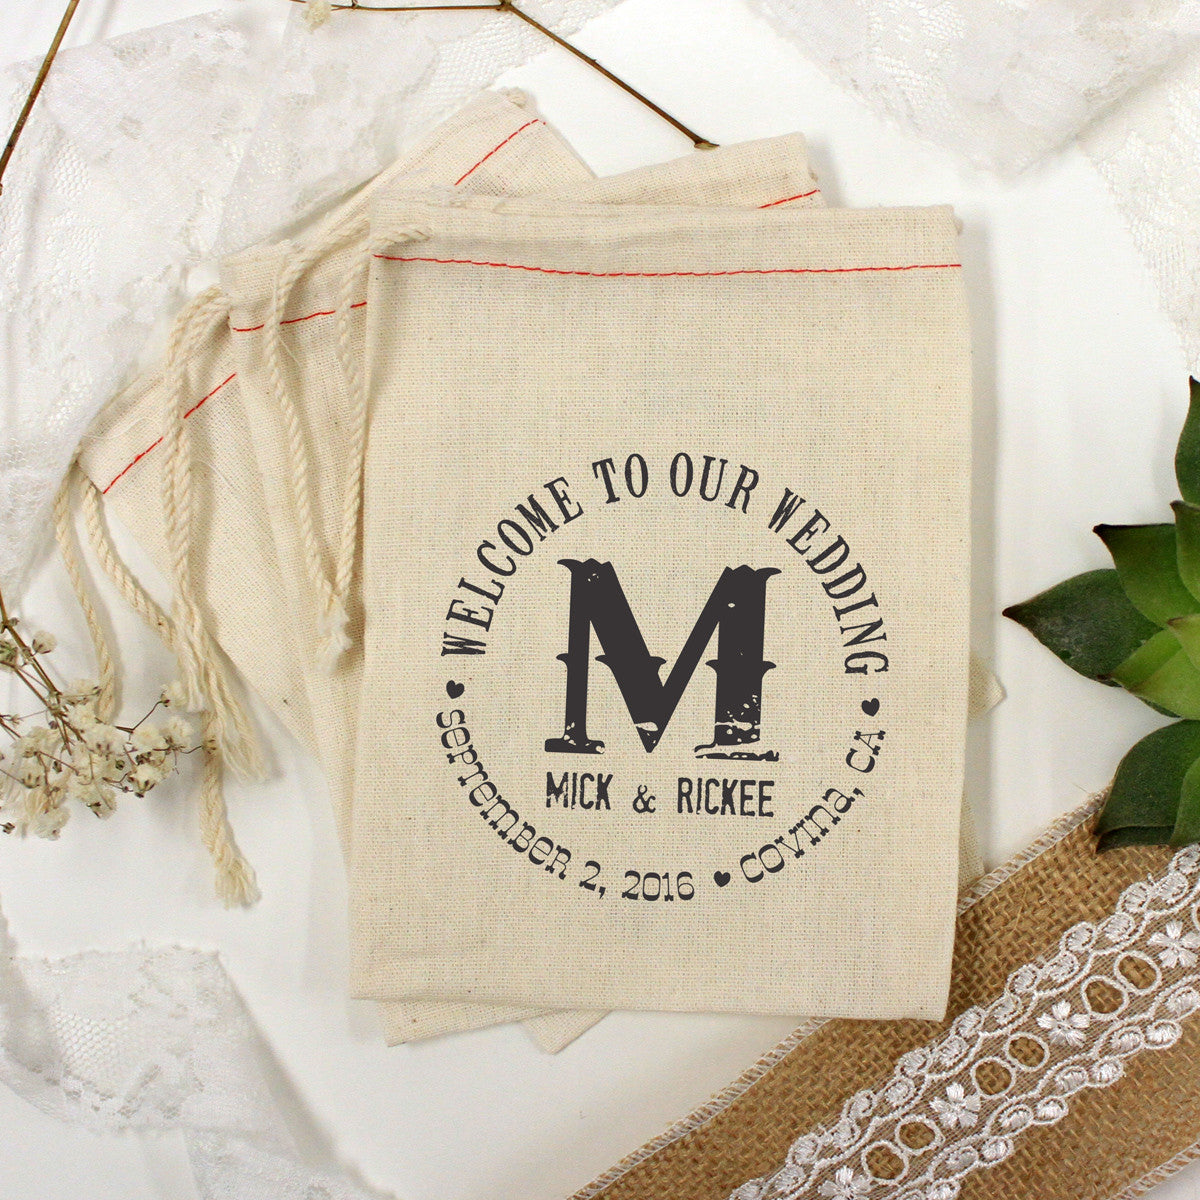 Muslin Bag - Welcome to Our Wedding Mick & Rickee - Set of 25